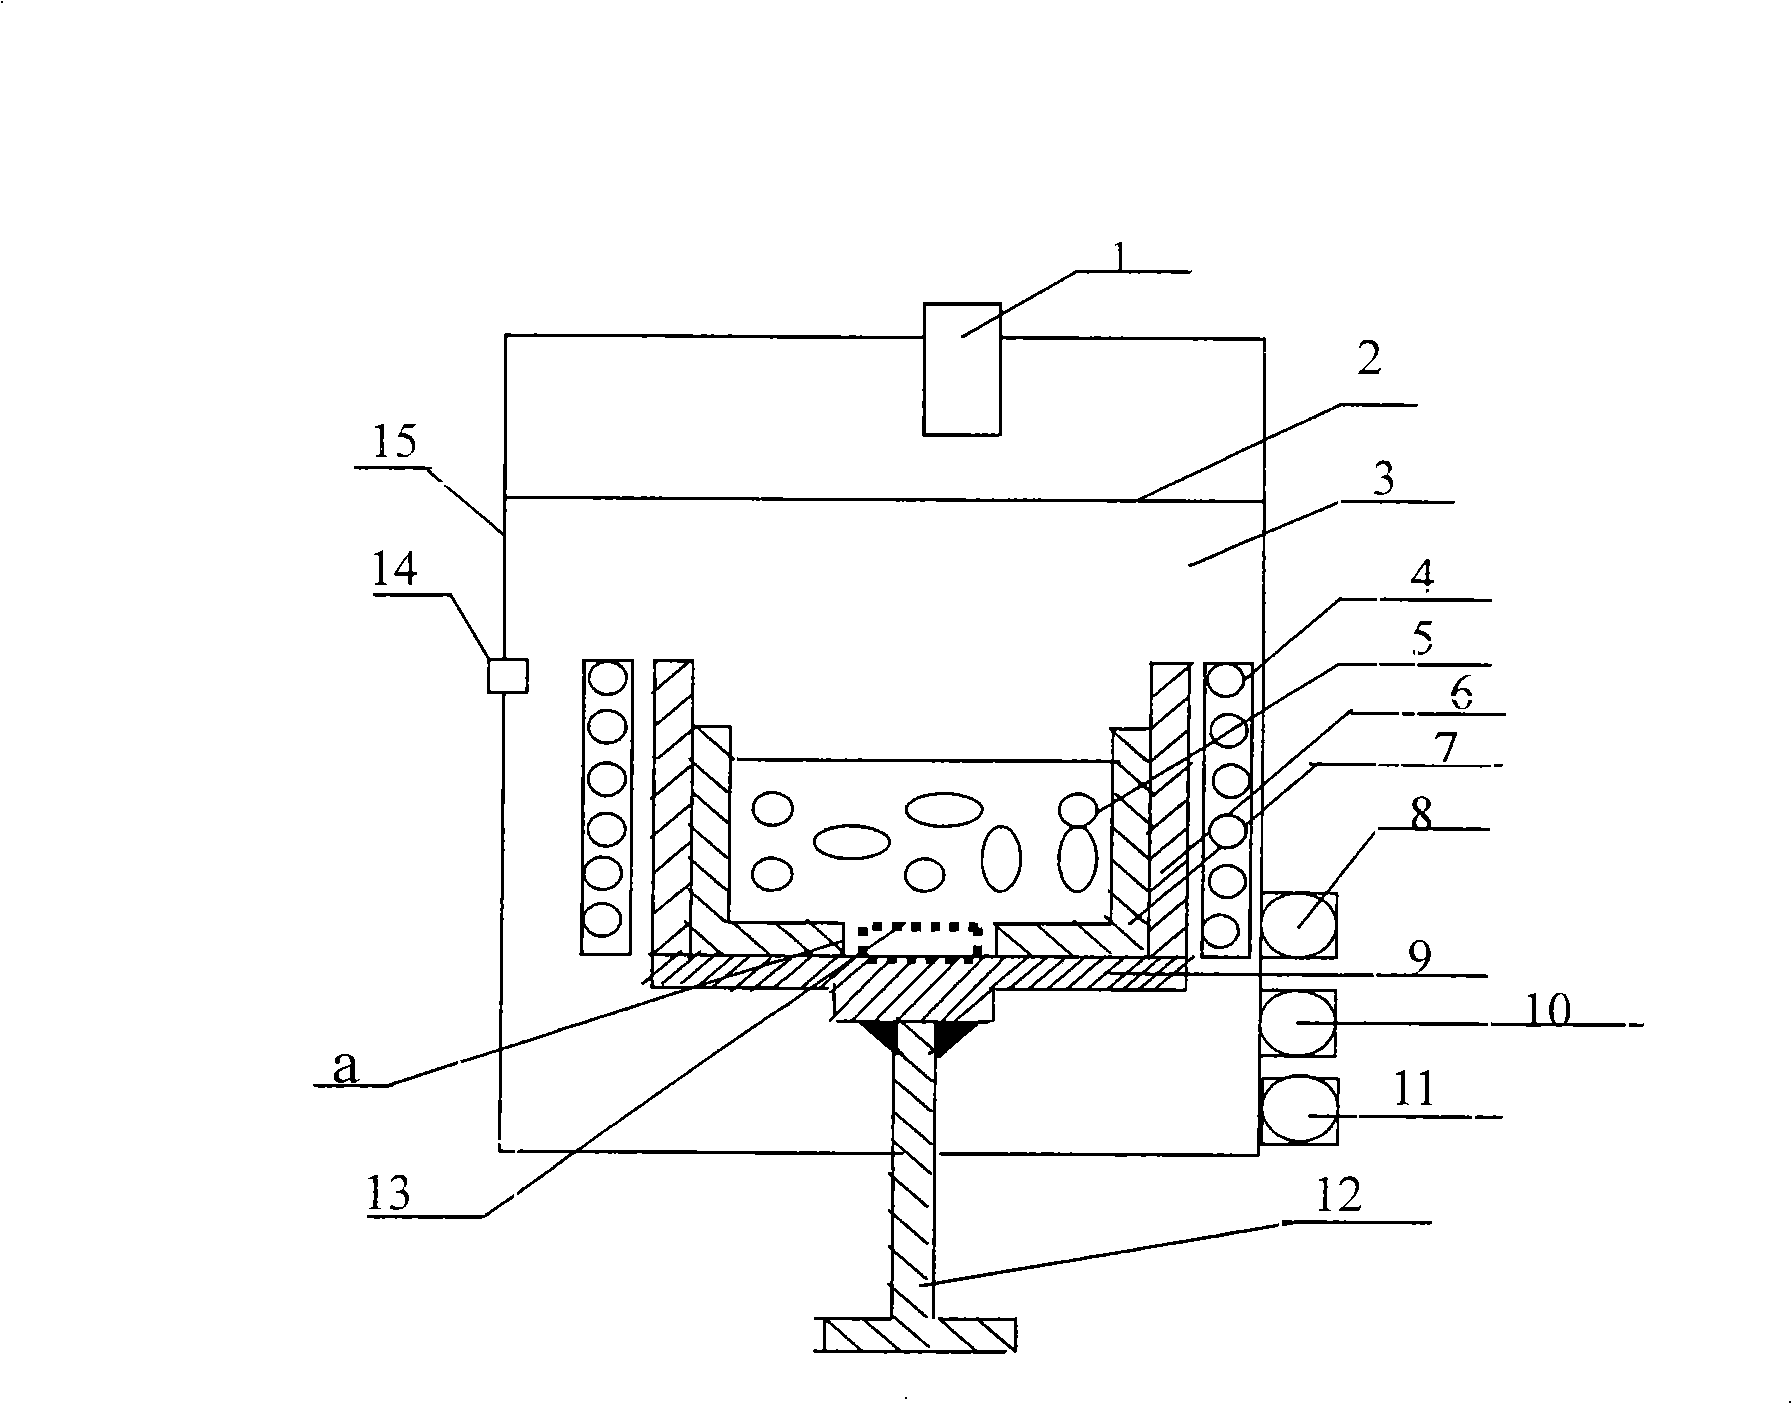 Process and device for removing phosphorus and metal impurities in polycrystalline silicon